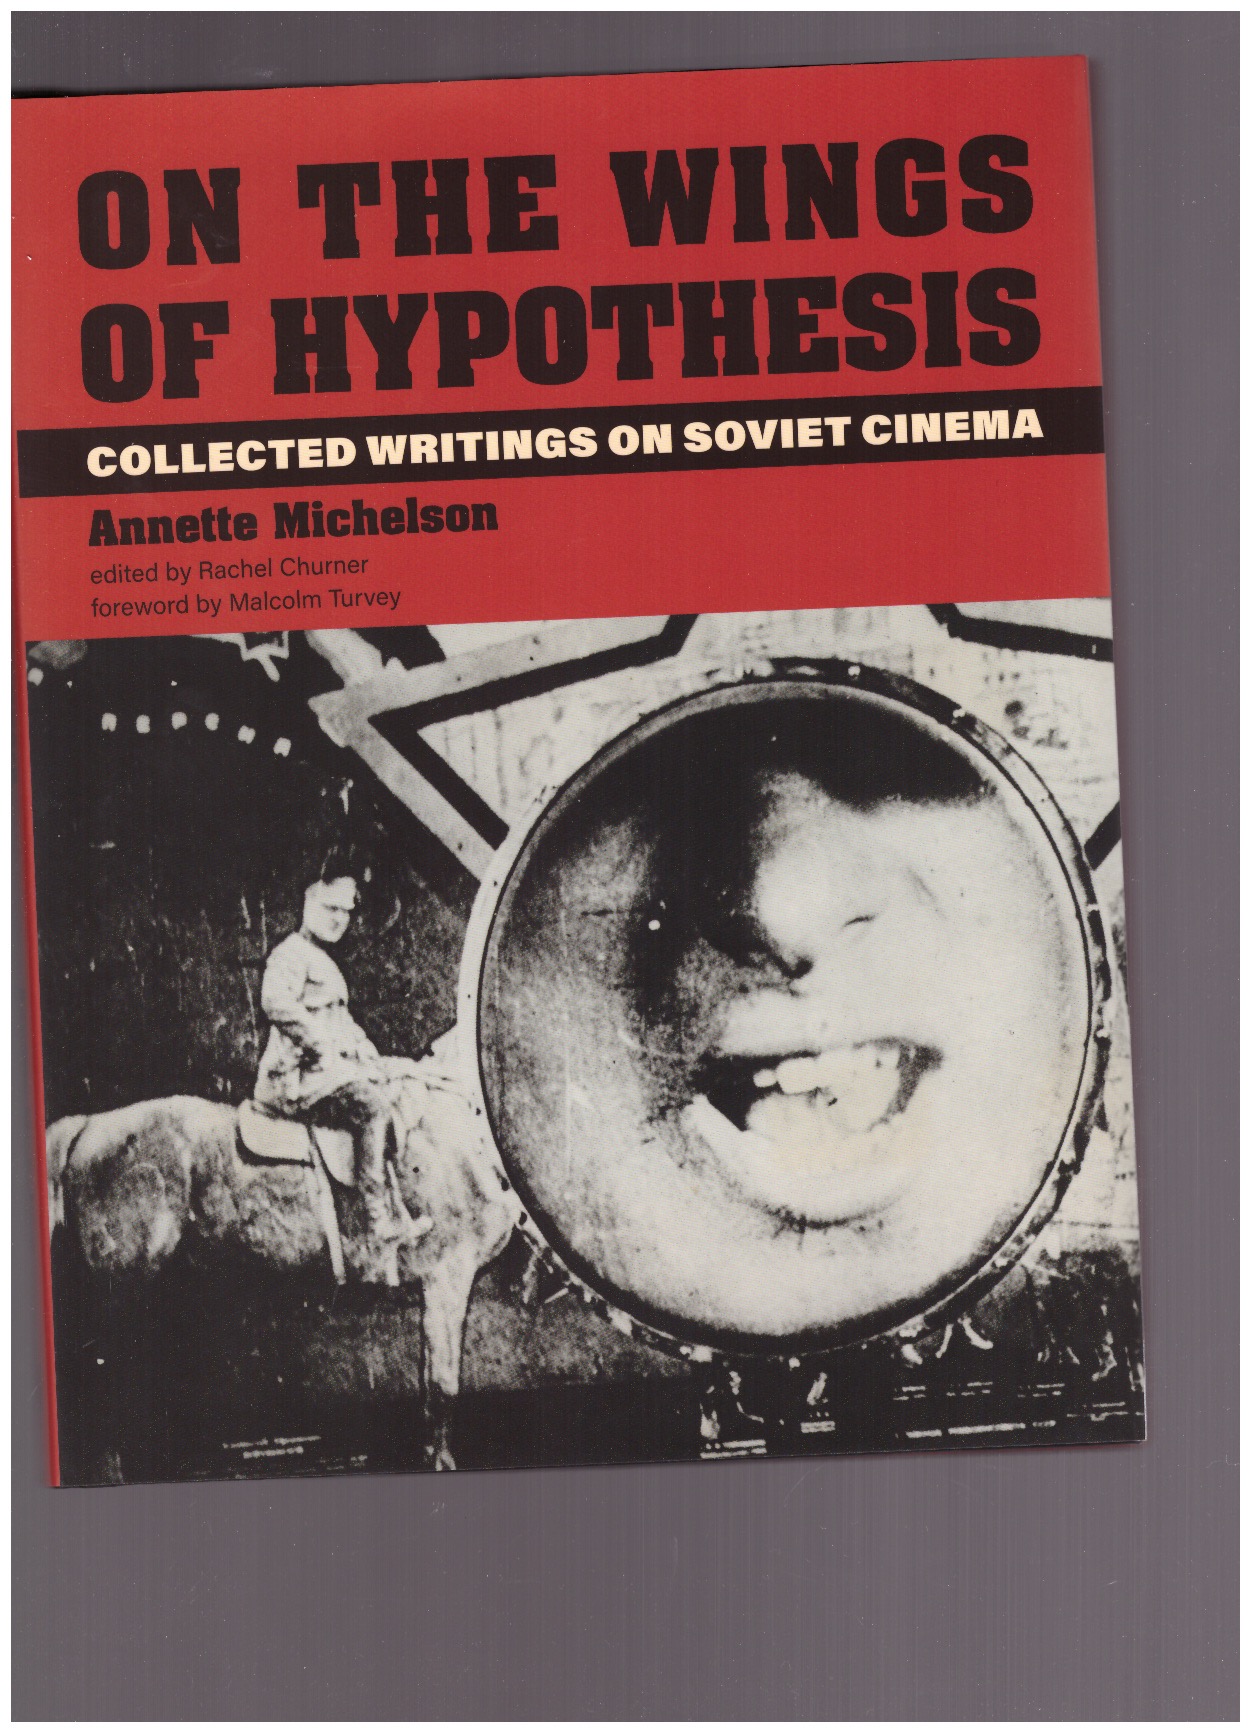 MICHELSON, Annette - On the wings of hypothesis : collected writings on soviet cinema